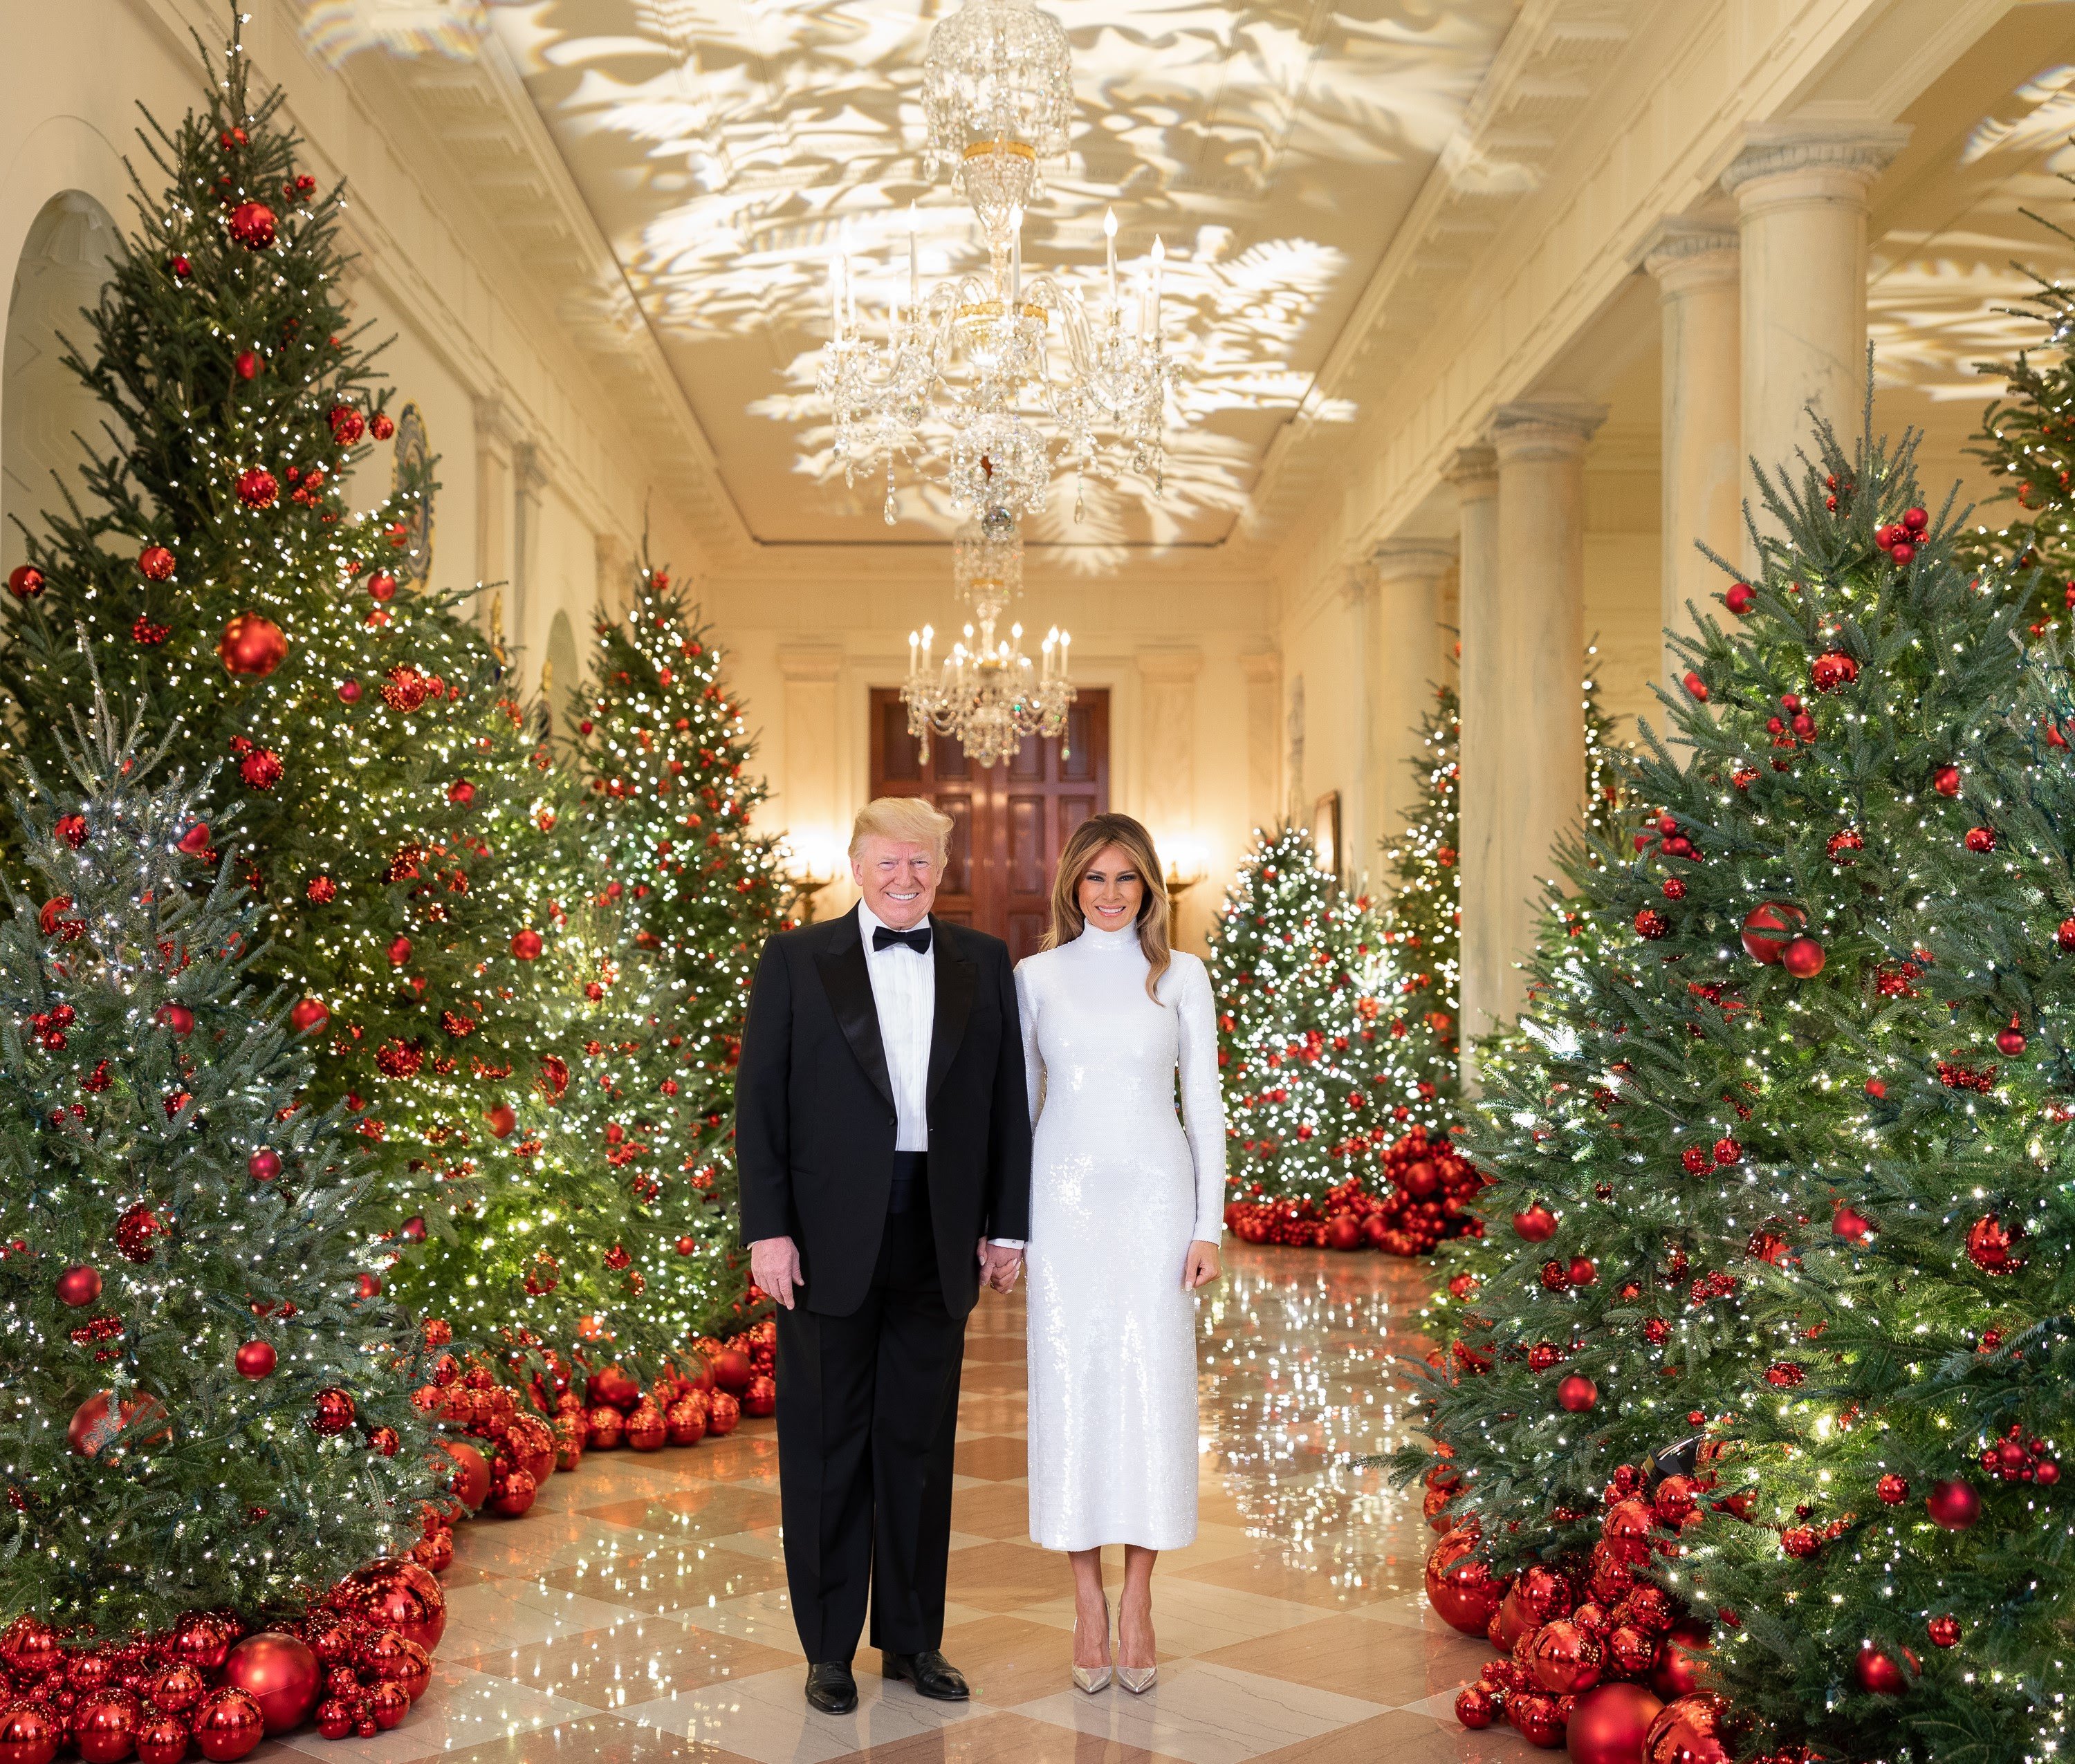 President Donald J. Trump and First Lady Melania Trump are seen in their Official Christmas Portrait on Saturday, December 15, 2018, in the Cross Hall of the White House in Washington, D.C. (Official White House Photo by Andrea Hanks)